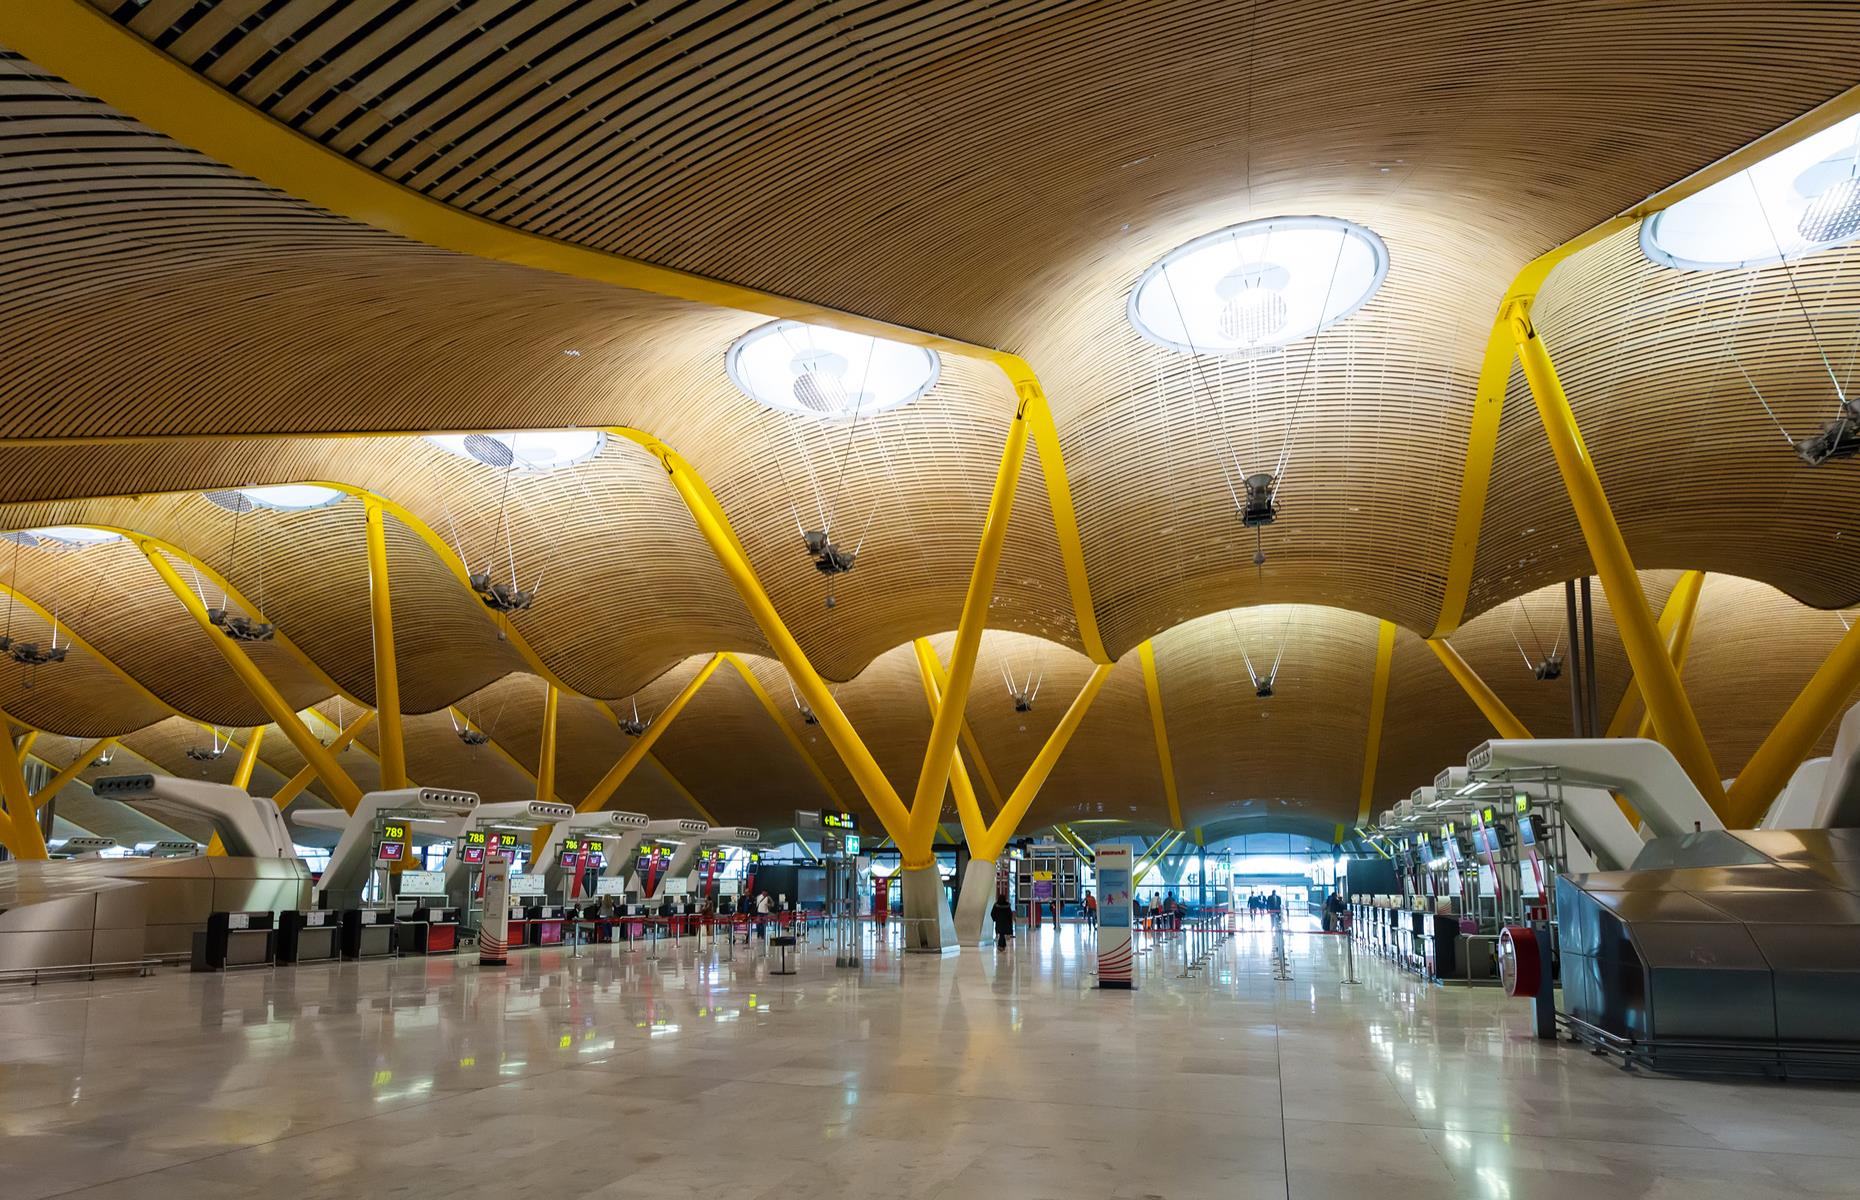 Heavily upgraded in 2006, this Madrid airport is one for architecture lovers. Gazing at the undulating ceiling, brilliant yellow beams and bold contemporary art is a perfect pastime, while natural light floods in from the circular skylights.